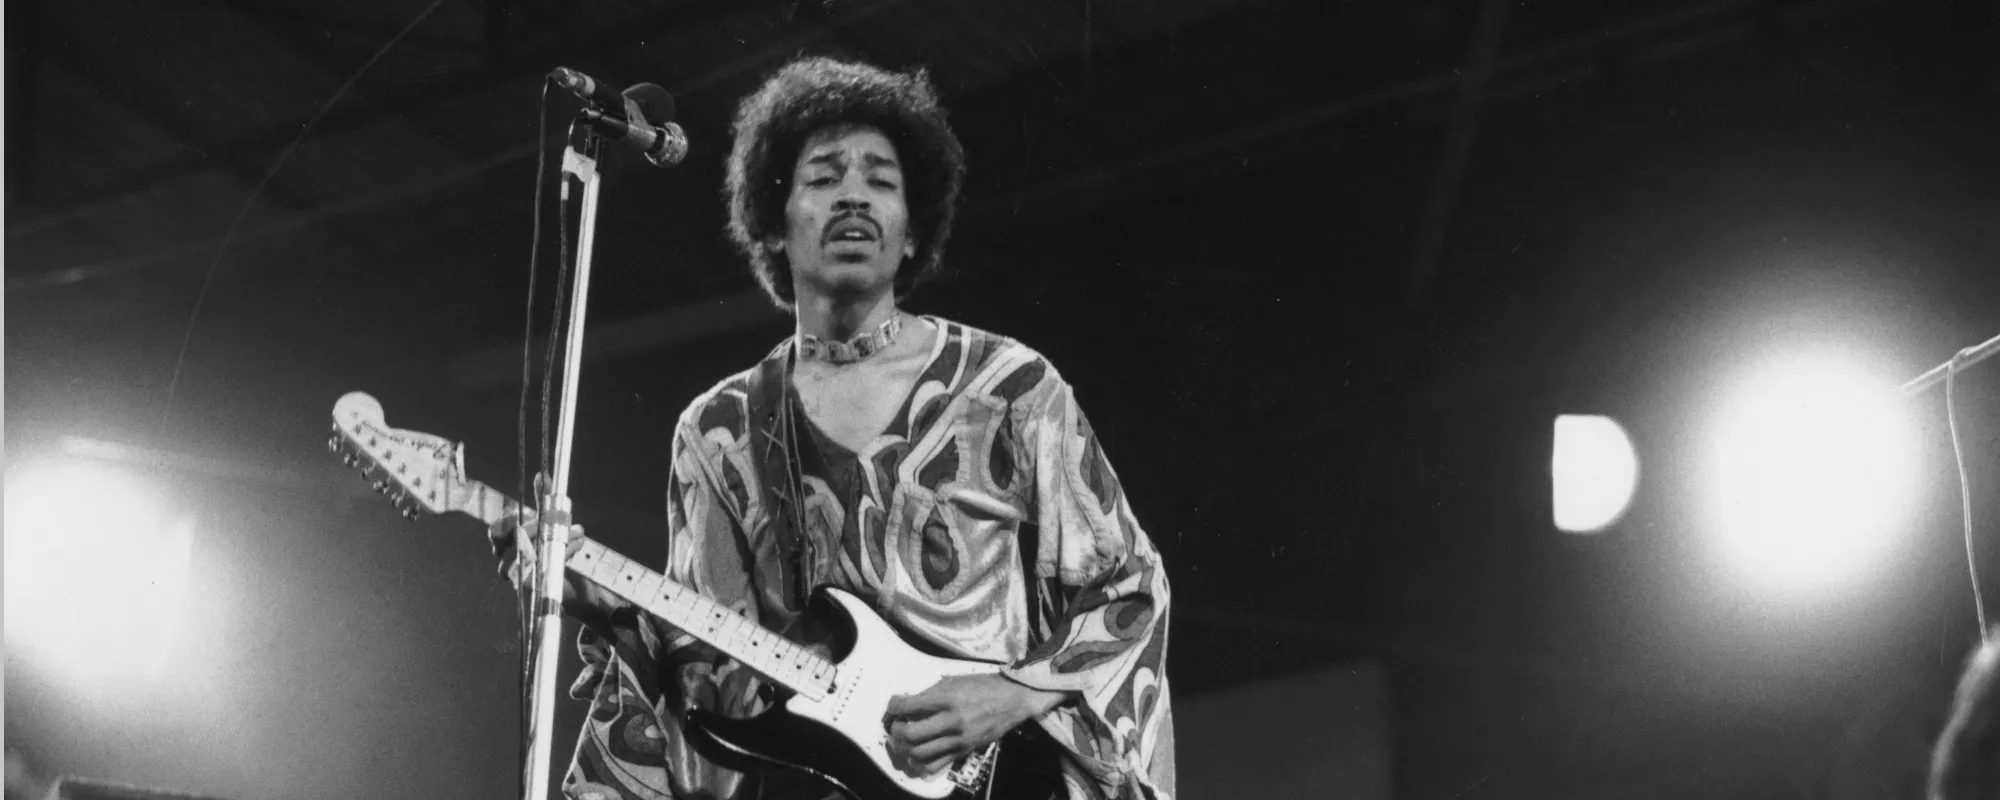 Remember When Jimi Hendrix Toured with The Monkees?